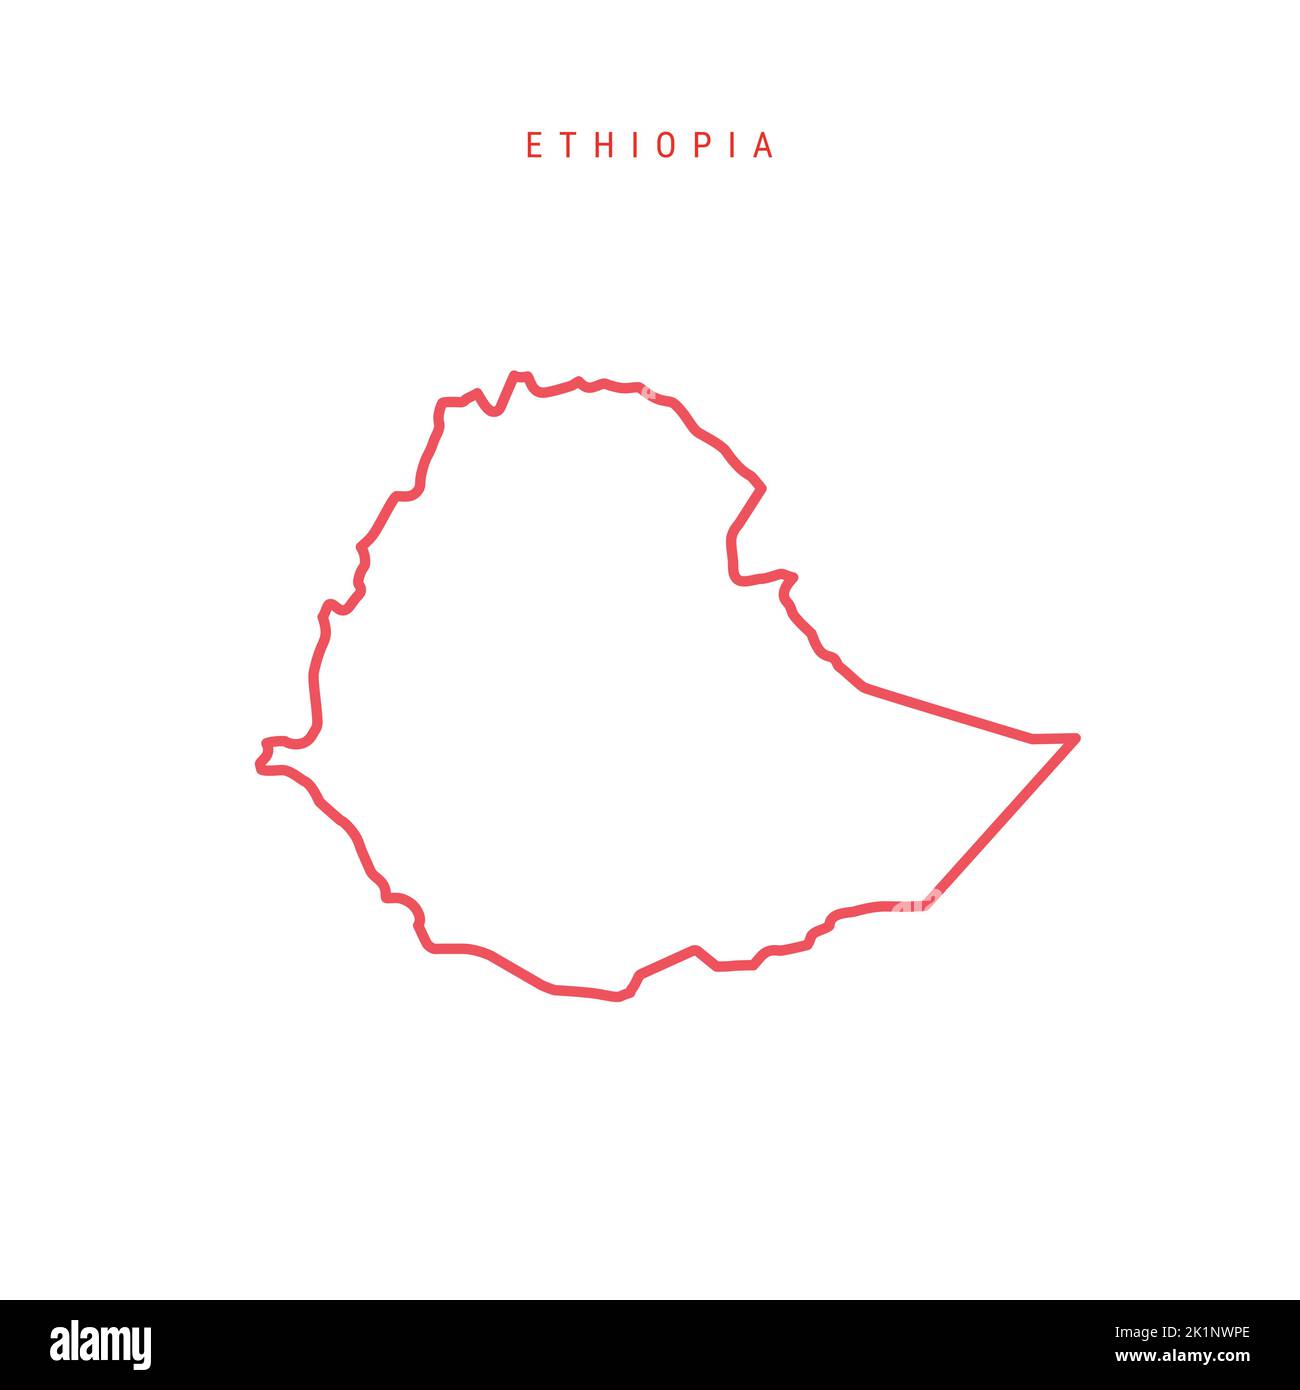 Ethiopia editable outline map. Ethiopian red border. Country name. Adjust line weight. Change to any color. Vector illustration. Stock Vector